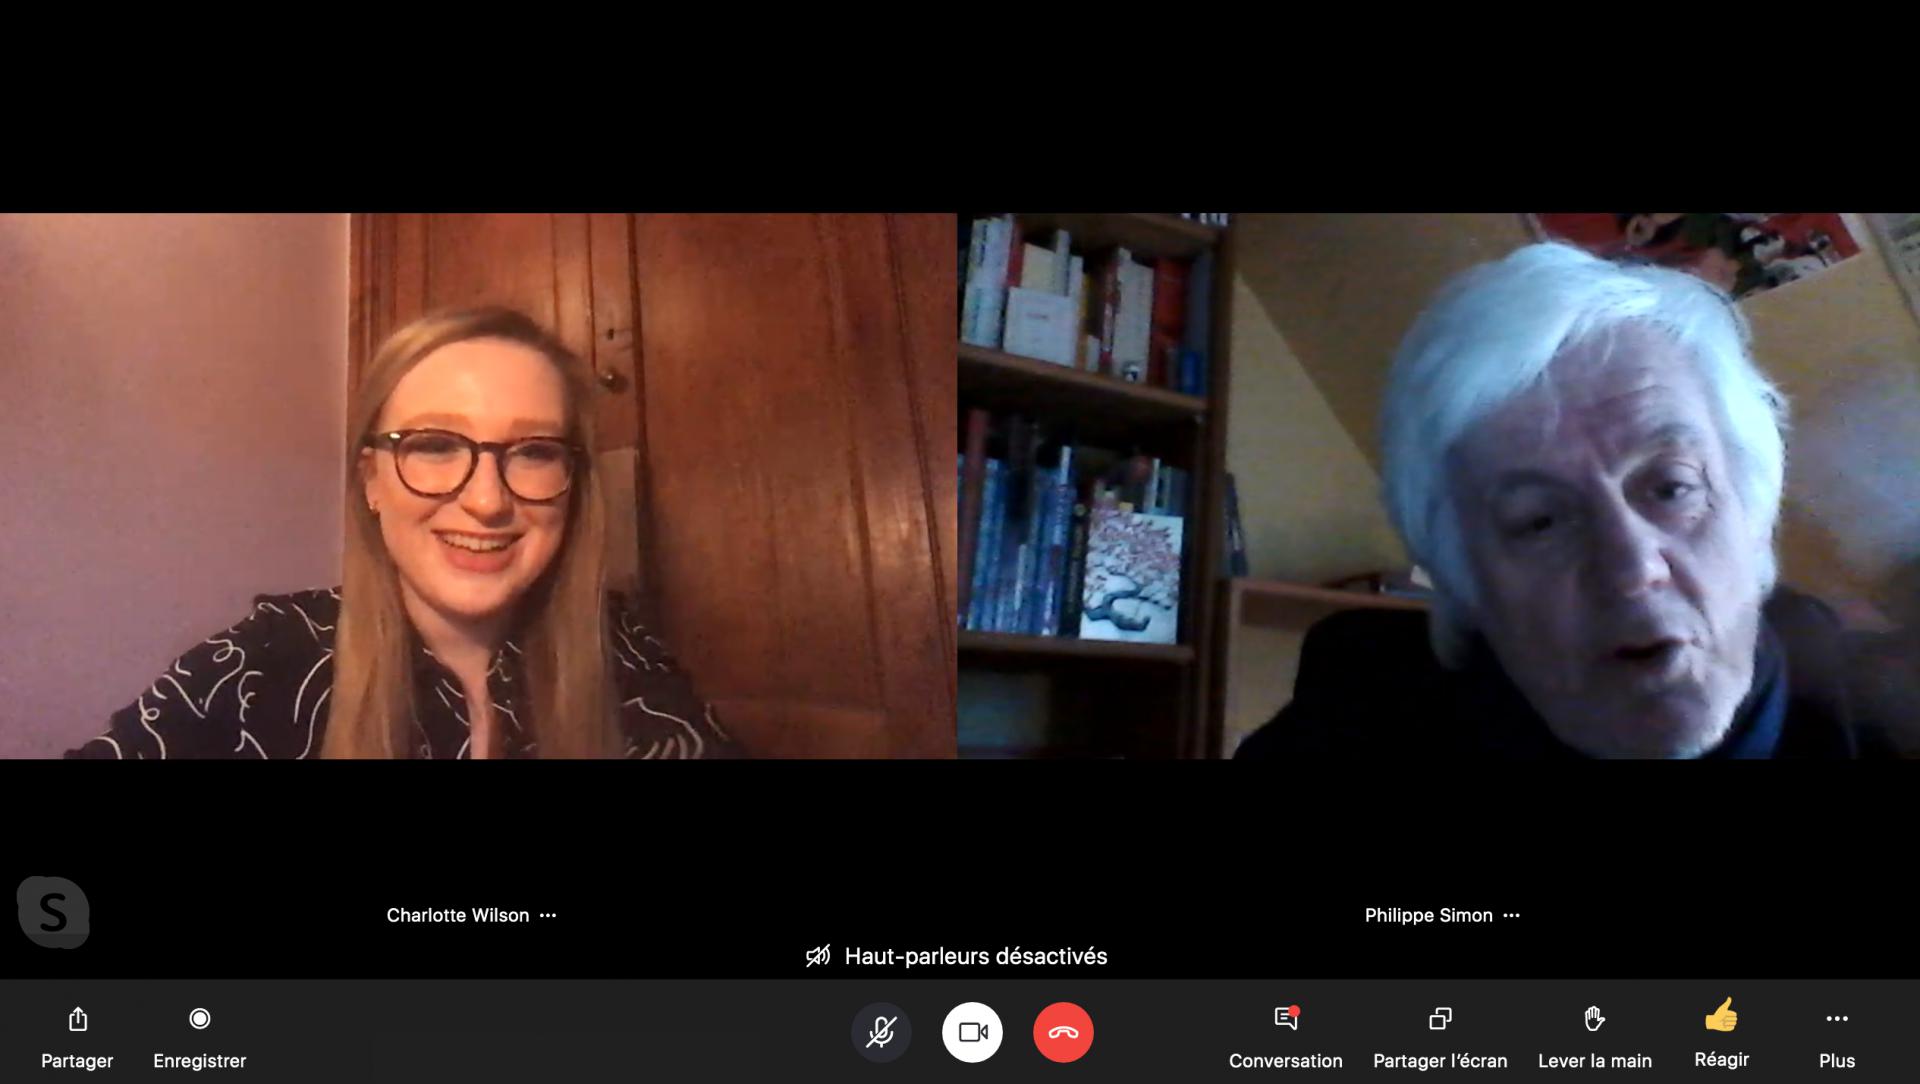 A screenshot on a Google hangout call between 19-year-old Charlotte Wilson and 61-year-old Philippe Simon